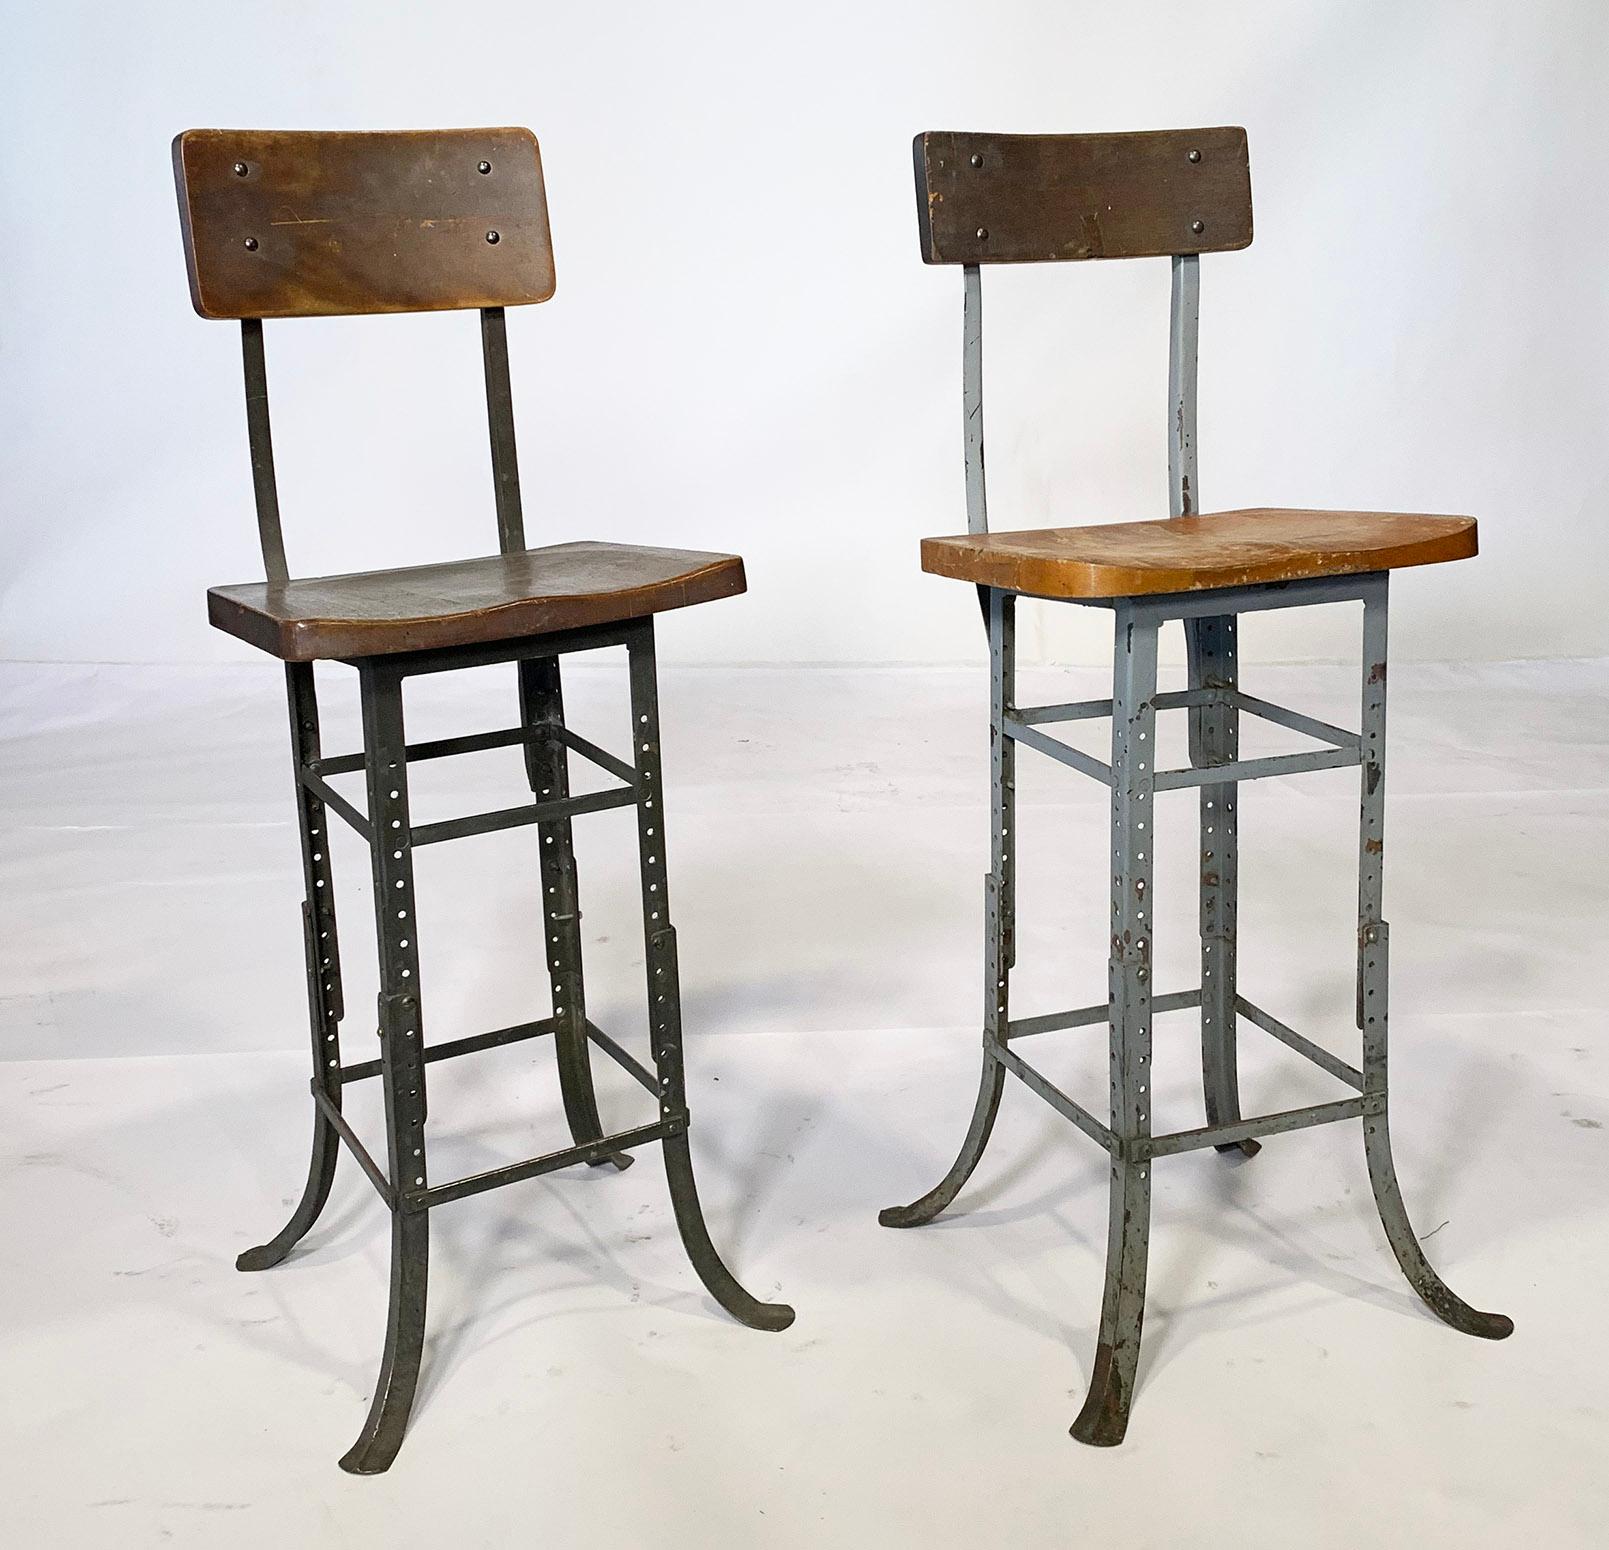 Pair of Wood & Metal Factory Shop Stools, with a seat height of 27 1/2